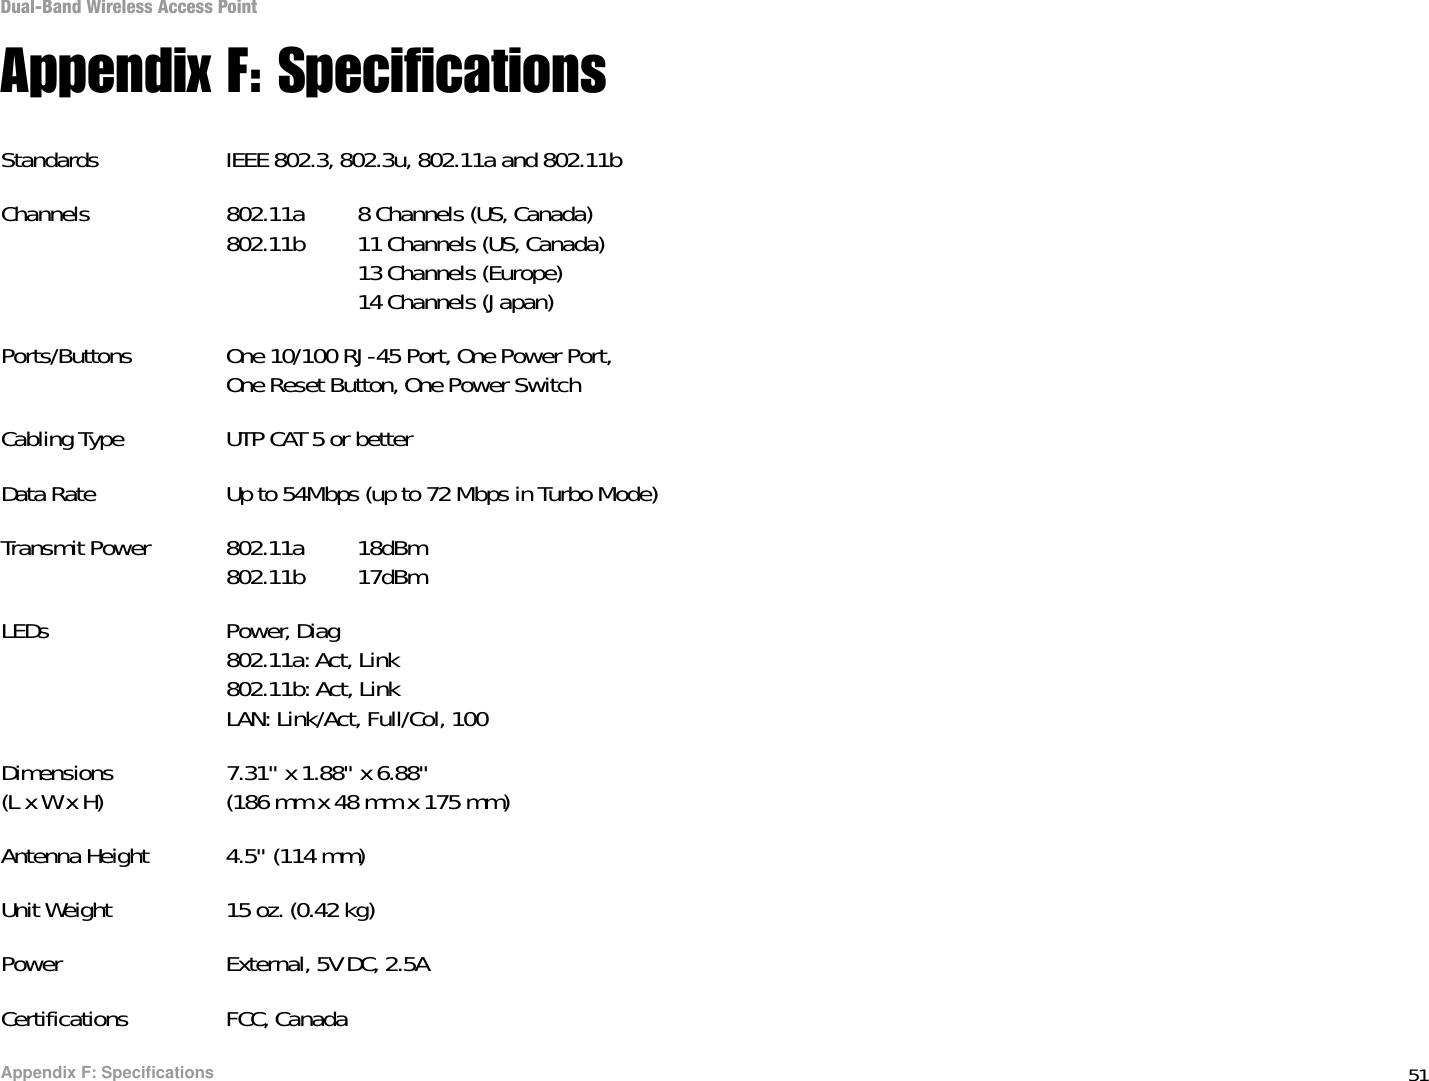 51Appendix F: SpecificationsDual-Band Wireless Access PointAppendix F: SpecificationsStandards IEEE 802.3, 802.3u, 802.11a and 802.11bChannels 802.11a 8 Channels (US, Canada)802.11b 11 Channels (US, Canada)13 Channels (Europe)14 Channels (Japan)Ports/Buttons One 10/100 RJ-45 Port, One Power Port,One Reset Button, One Power SwitchCabling Type UTP CAT 5 or betterData Rate Up to 54Mbps (up to 72 Mbps in Turbo Mode)Transmit Power 802.11a 18dBm802.11b 17dBmLEDs Power, Diag802.11a: Act, Link802.11b: Act, LinkLAN: Link/Act, Full/Col, 100Dimensions 7.31&quot; x 1.88&quot; x 6.88&quot;(L x W x H) (186 mm x 48 mm x 175 mm)Antenna Height 4.5&quot; (114 mm)Unit Weight 15 oz. (0.42 kg)Power External, 5V DC, 2.5ACertifications FCC, Canada